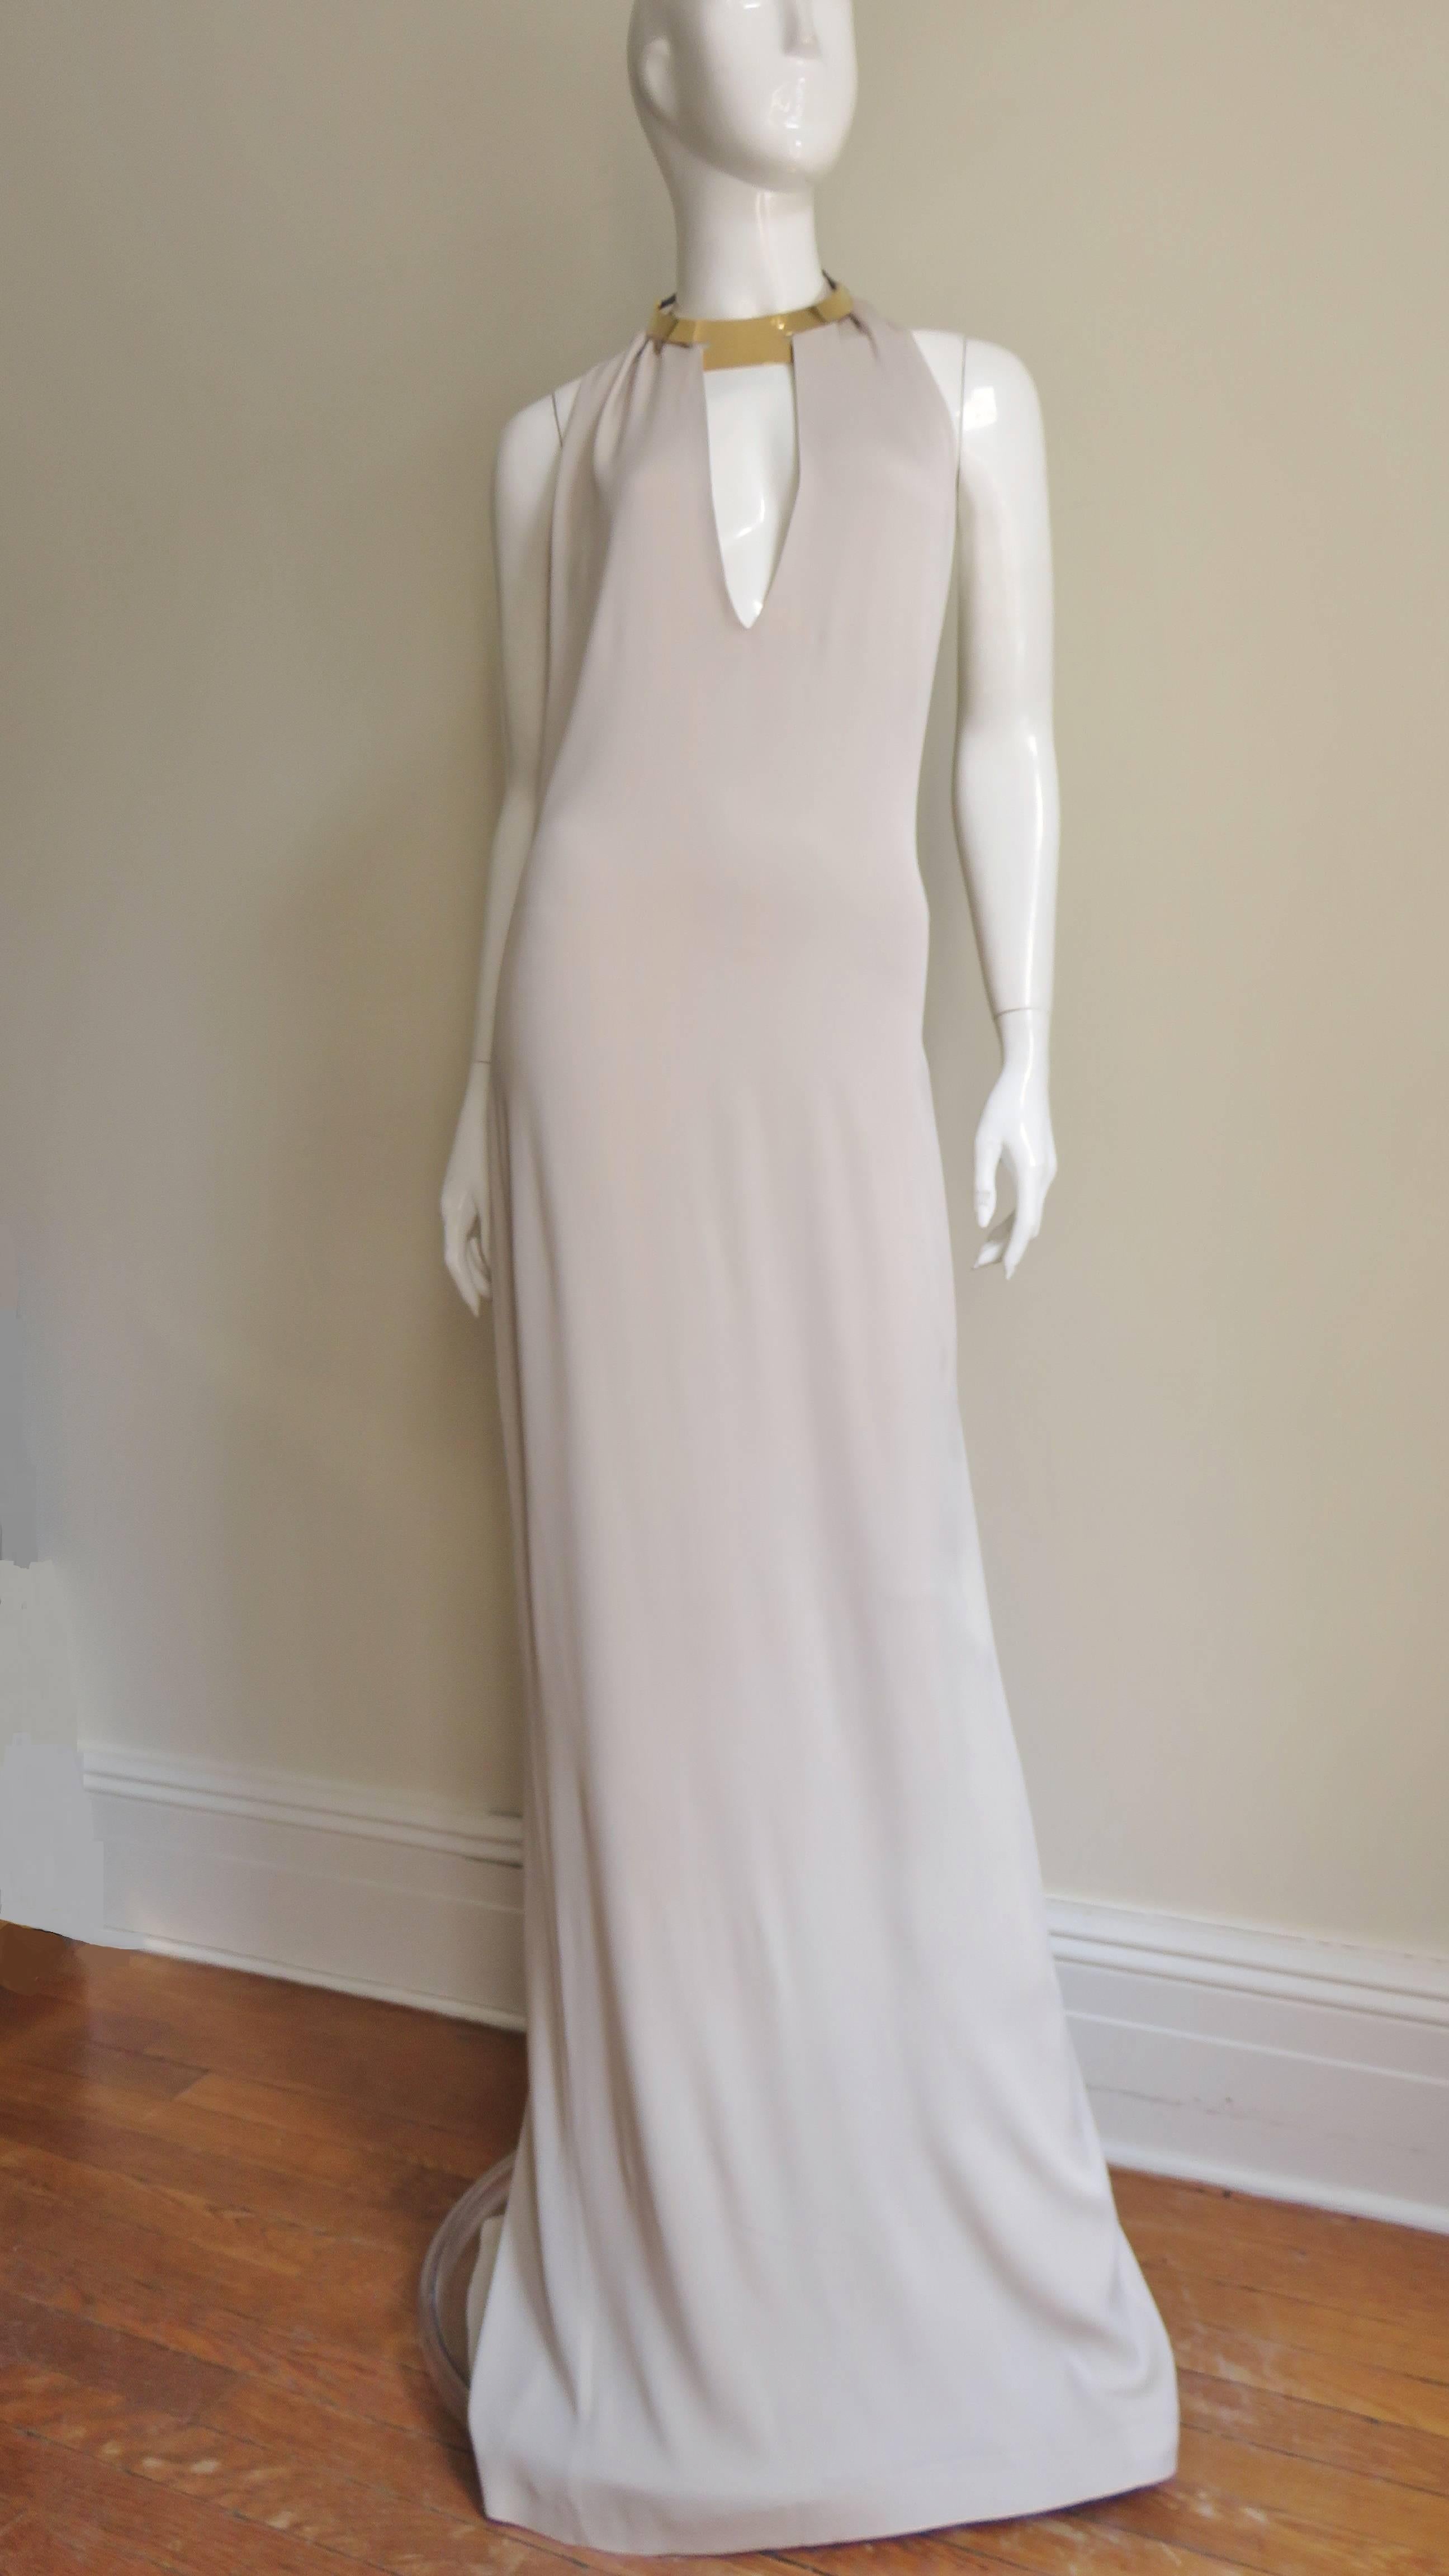 An absolutely gorgeous elegant light taupe colored silk jersey dress from Gucci.  It has a plunging keyhole cutout in the front and dips below the waist in the back.  The dress has a fabulous gold metal choker style attached collar with leather